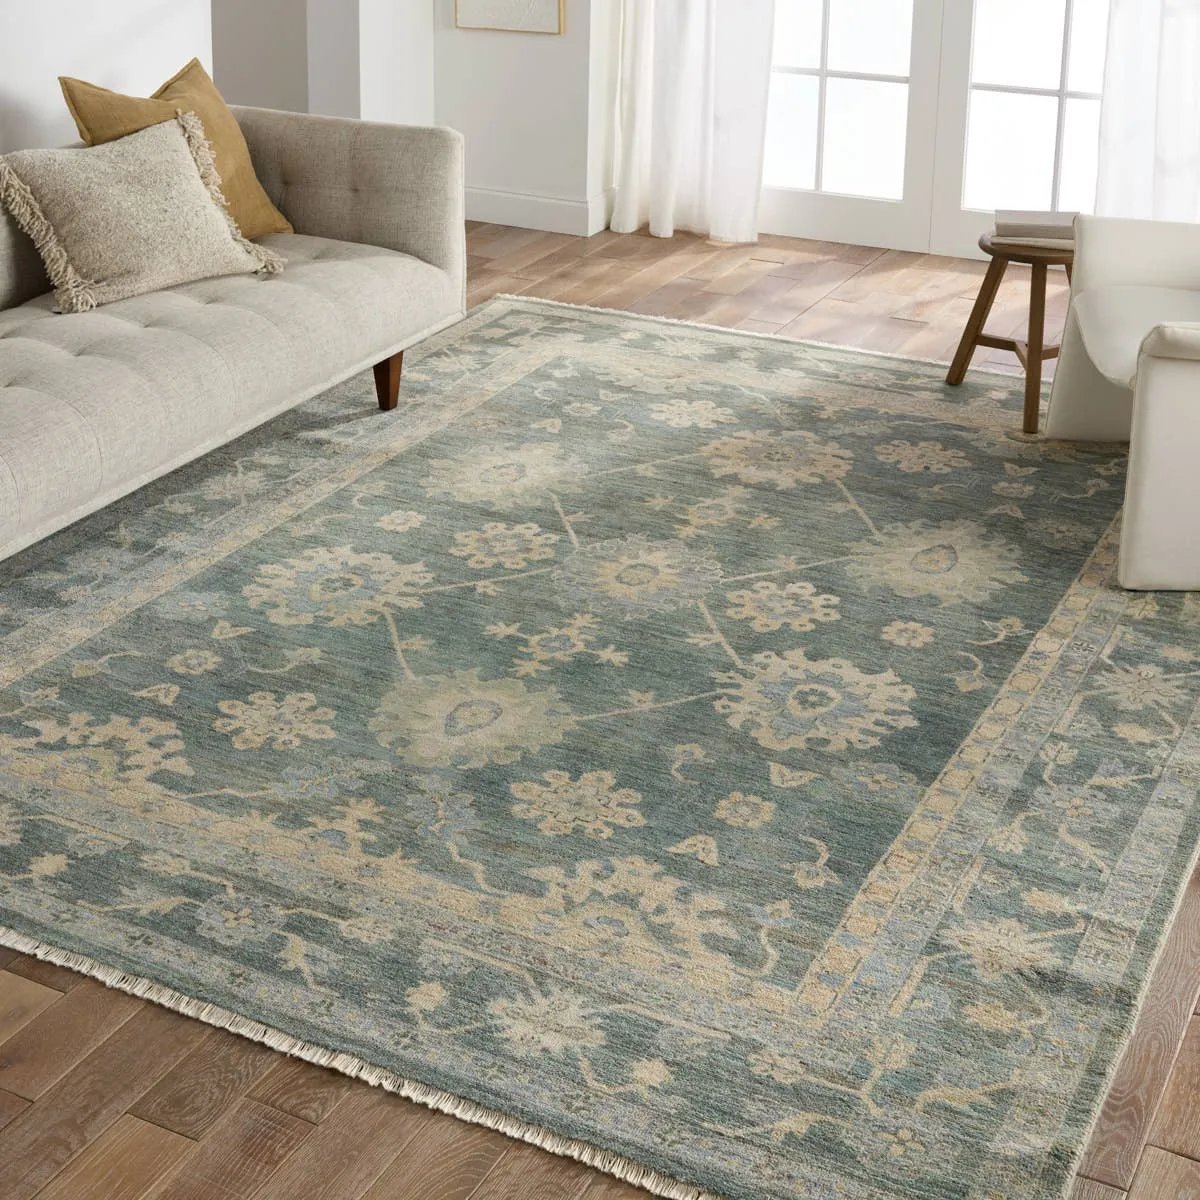 The Orenda Kerensa features heirloom-quality designs of muted and uniquely updated Old World patterns. The Kerensa area rug boasts a beautifully washed medallion motif with an antique Oushak-inspired vibe. The cream tone is accented with cool blues, greens, and warm beige hues for added depth and intrigue. Amethyst Home provides interior design, new home construction design consulting, vintage area rugs, and lighting in the Newport Beach metro area.